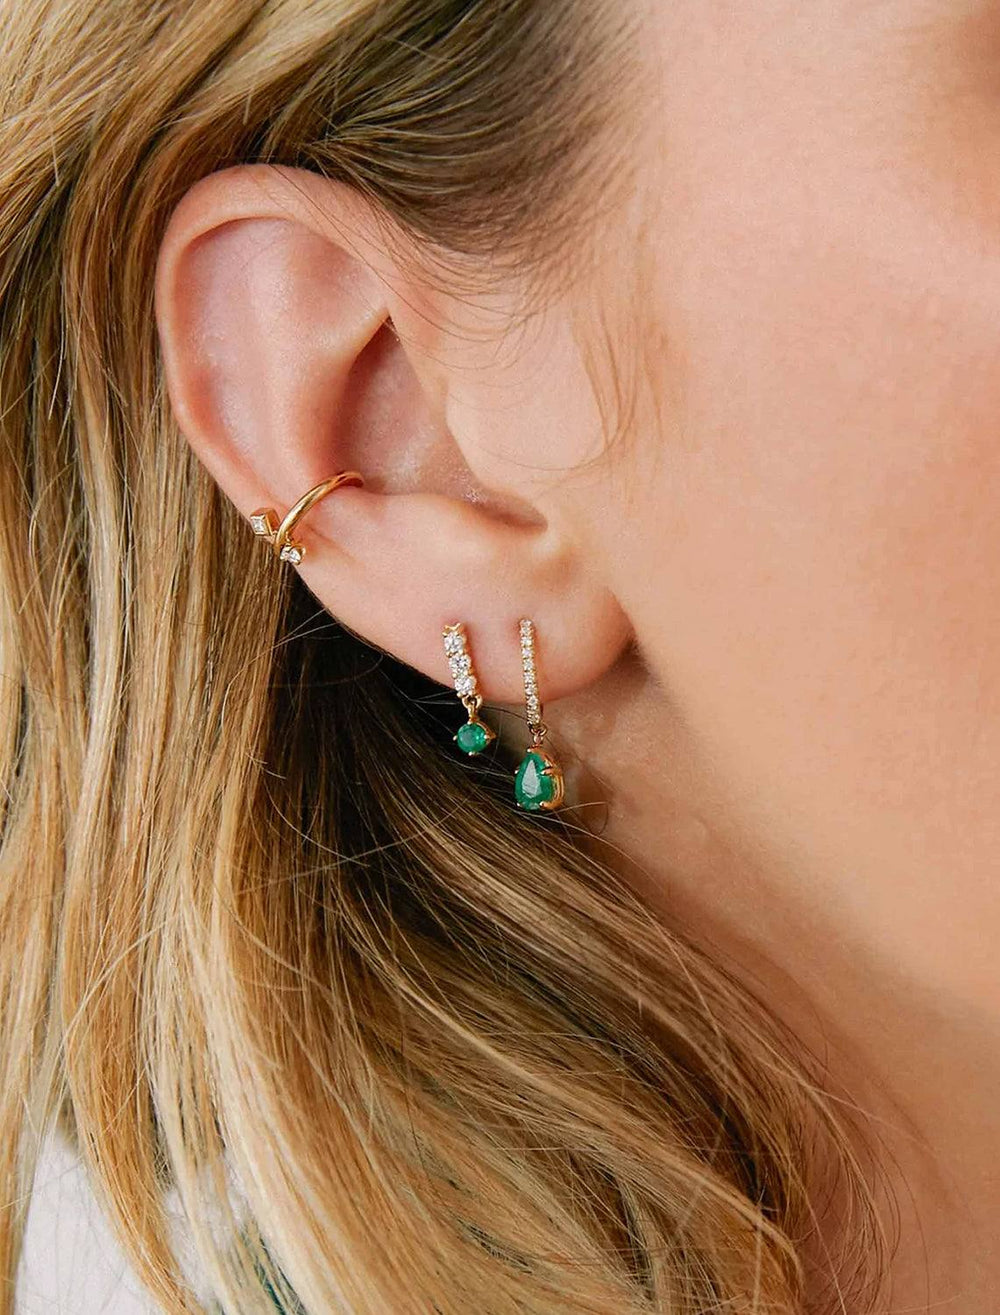 Close-up view of Zoe Chicco's 14k diamond bar earrings with emerald drops.